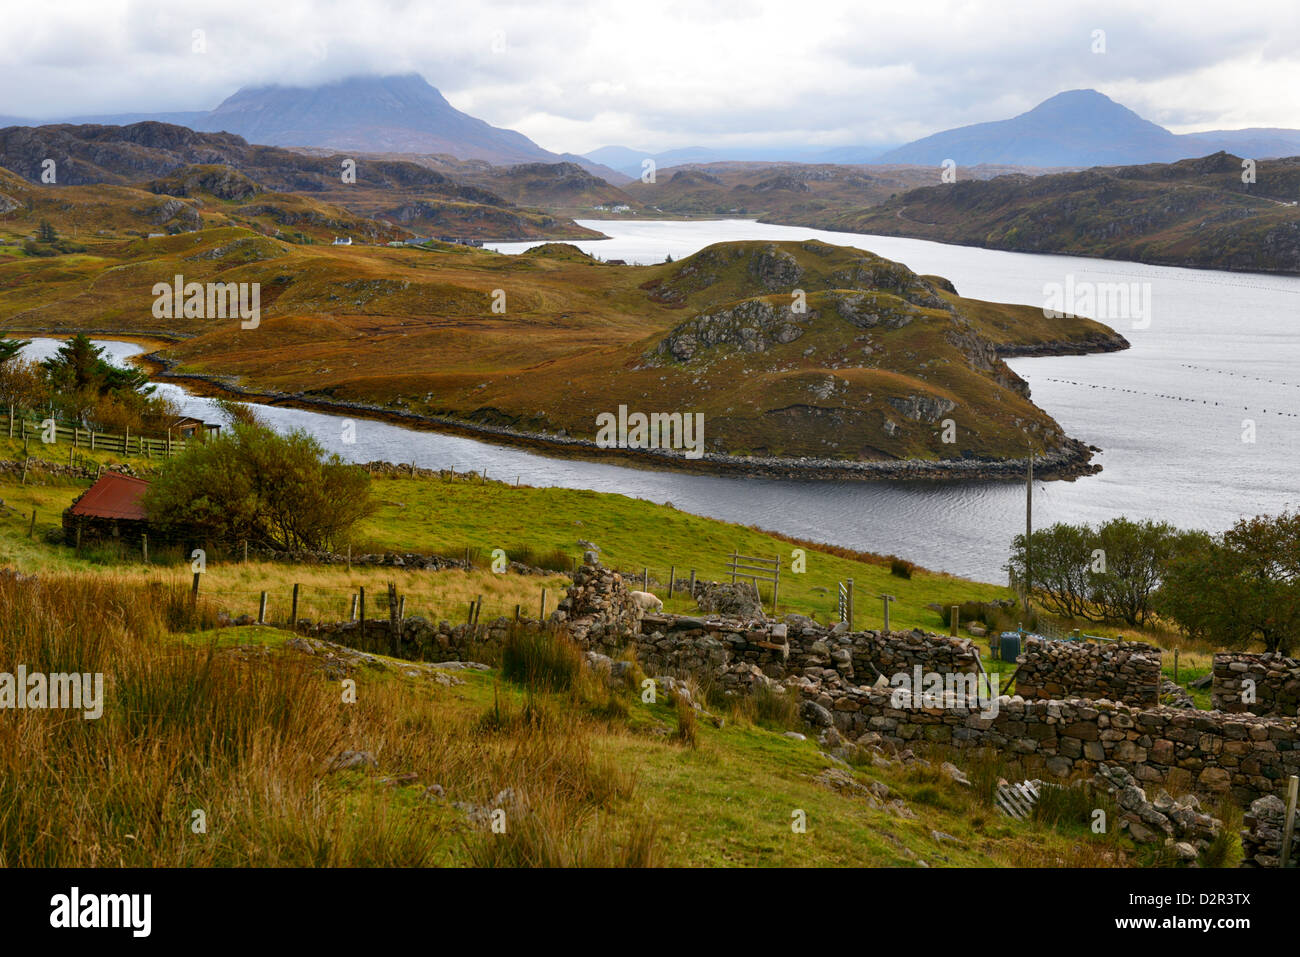 Paysage sauvage, North West Highlands, Ecosse, Royaume-Uni, Europe Banque D'Images